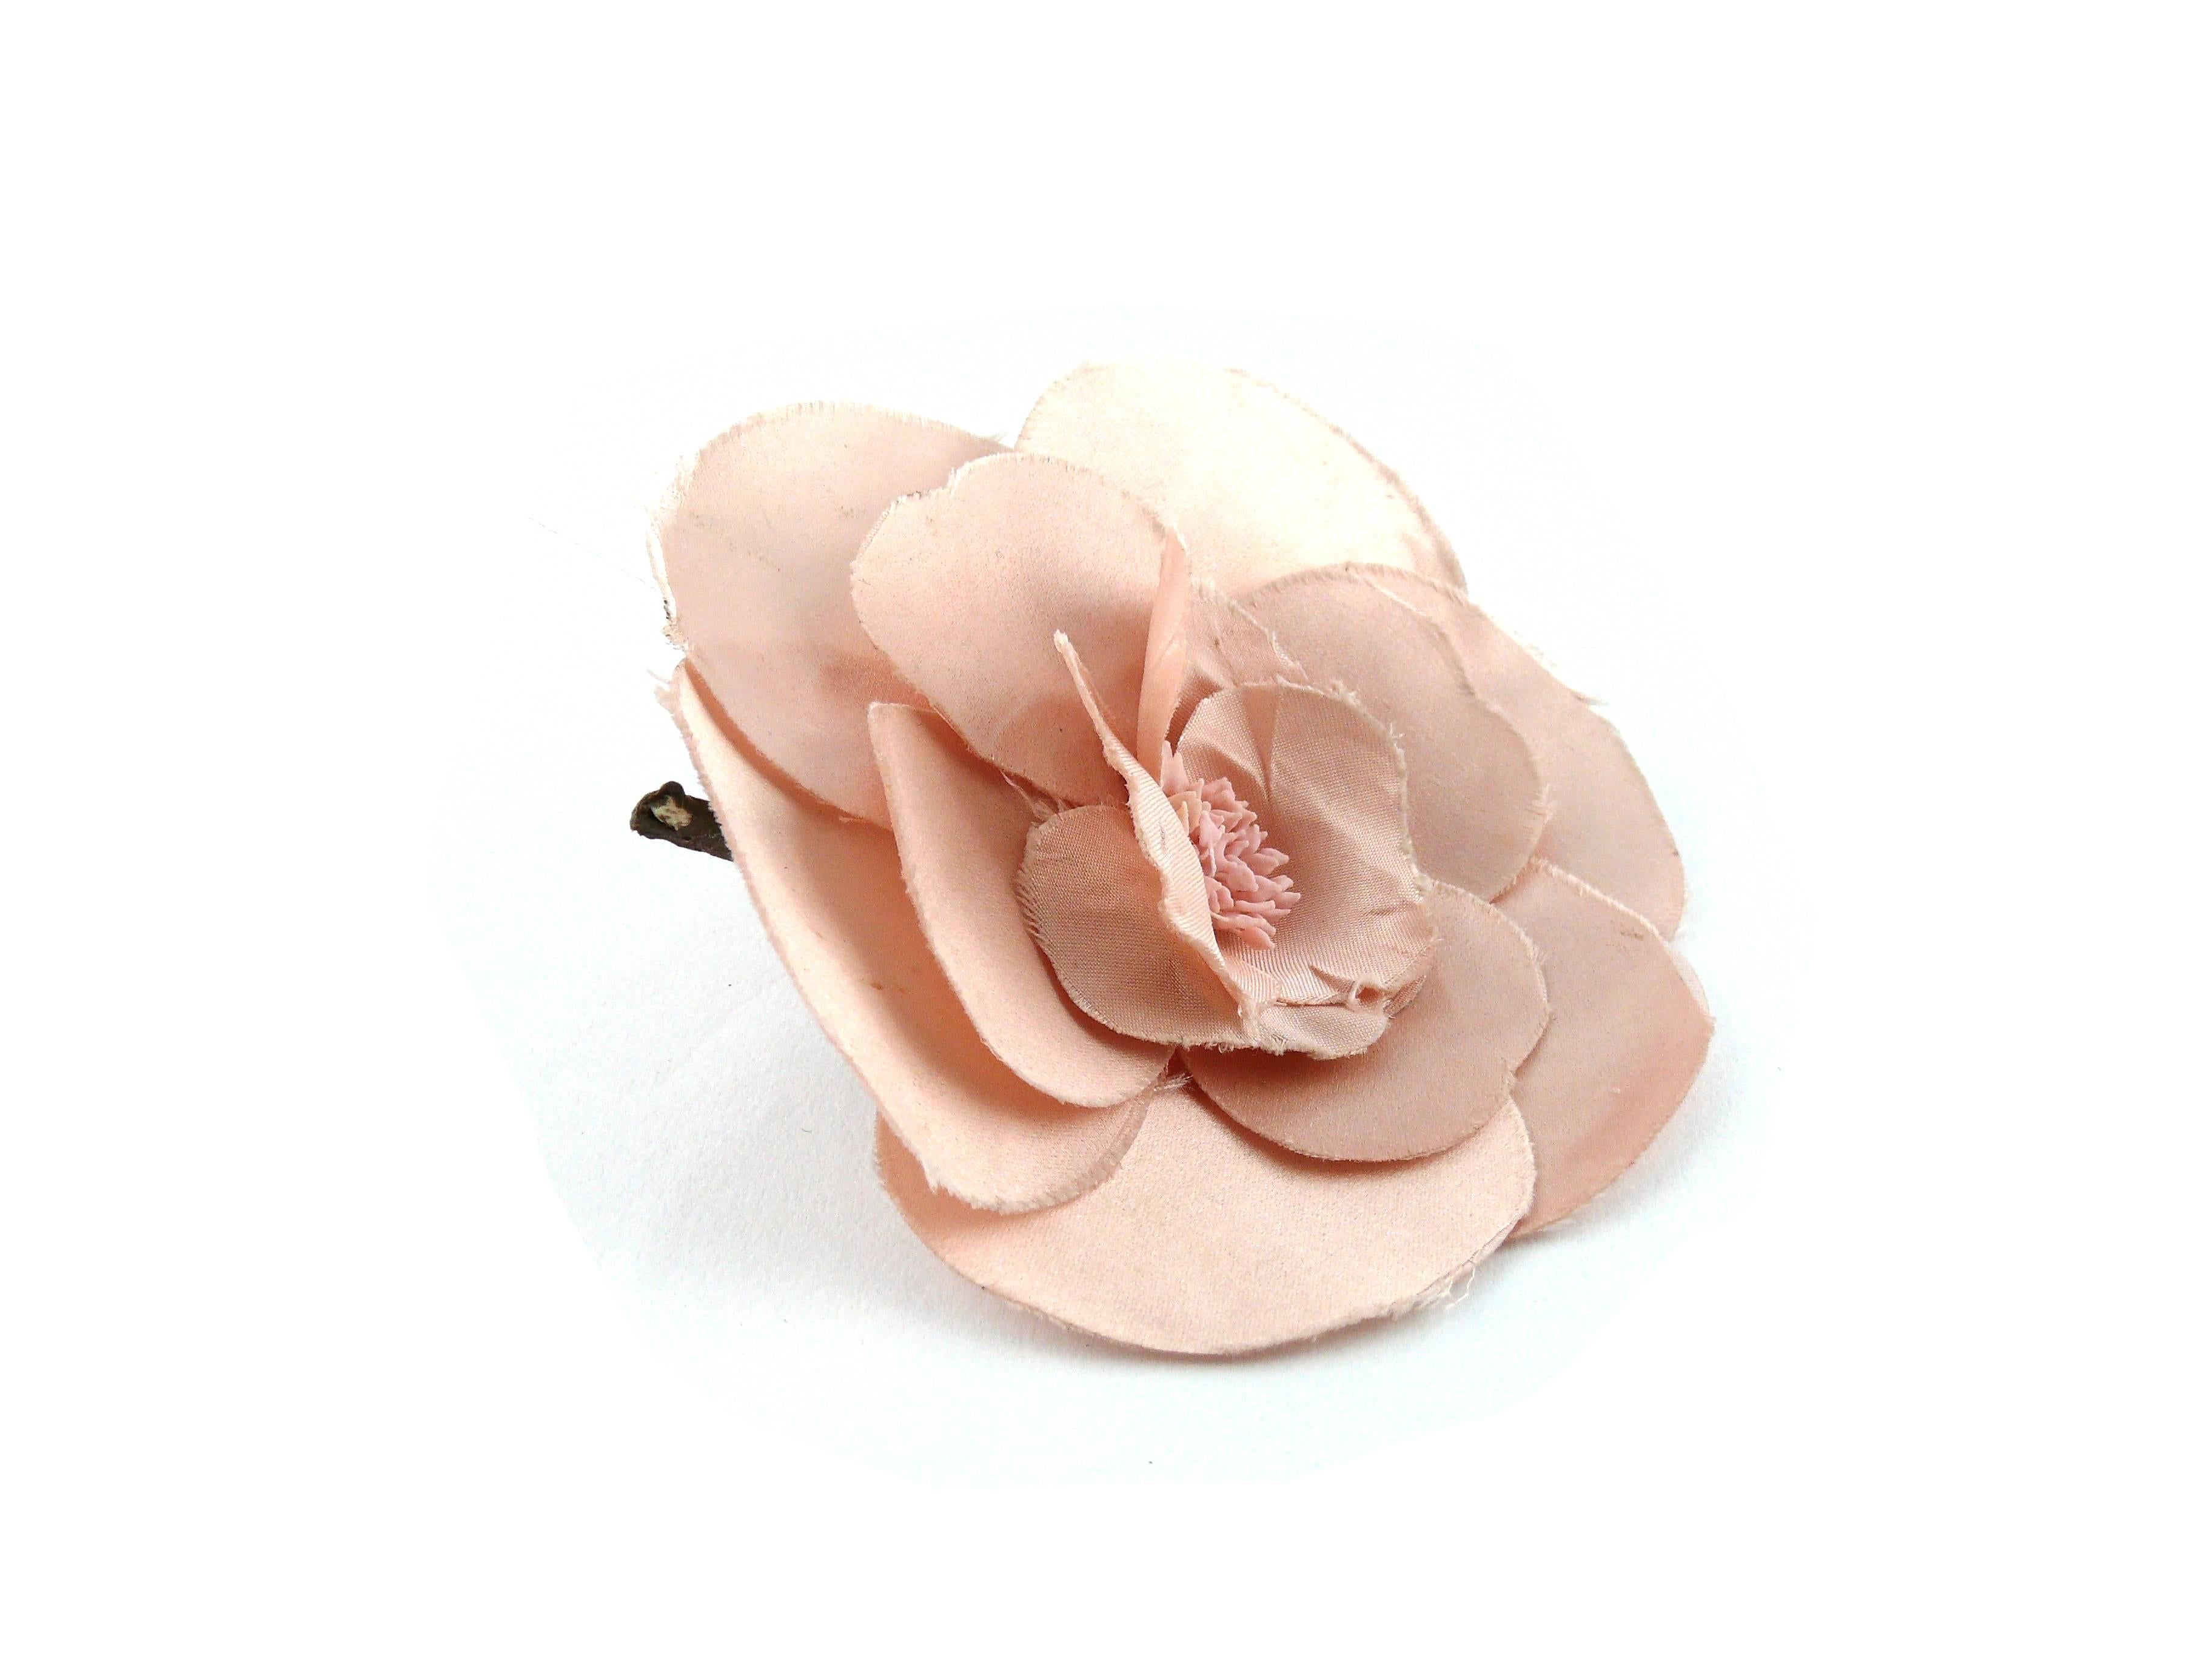 CHANEL vintage pale rose large classic silk camellia brooch.

Marked Chanel Made in France.

Note
As a buyer, you are fully responsible for customs duties, other local taxes and any administrative procedures related to imports into the country